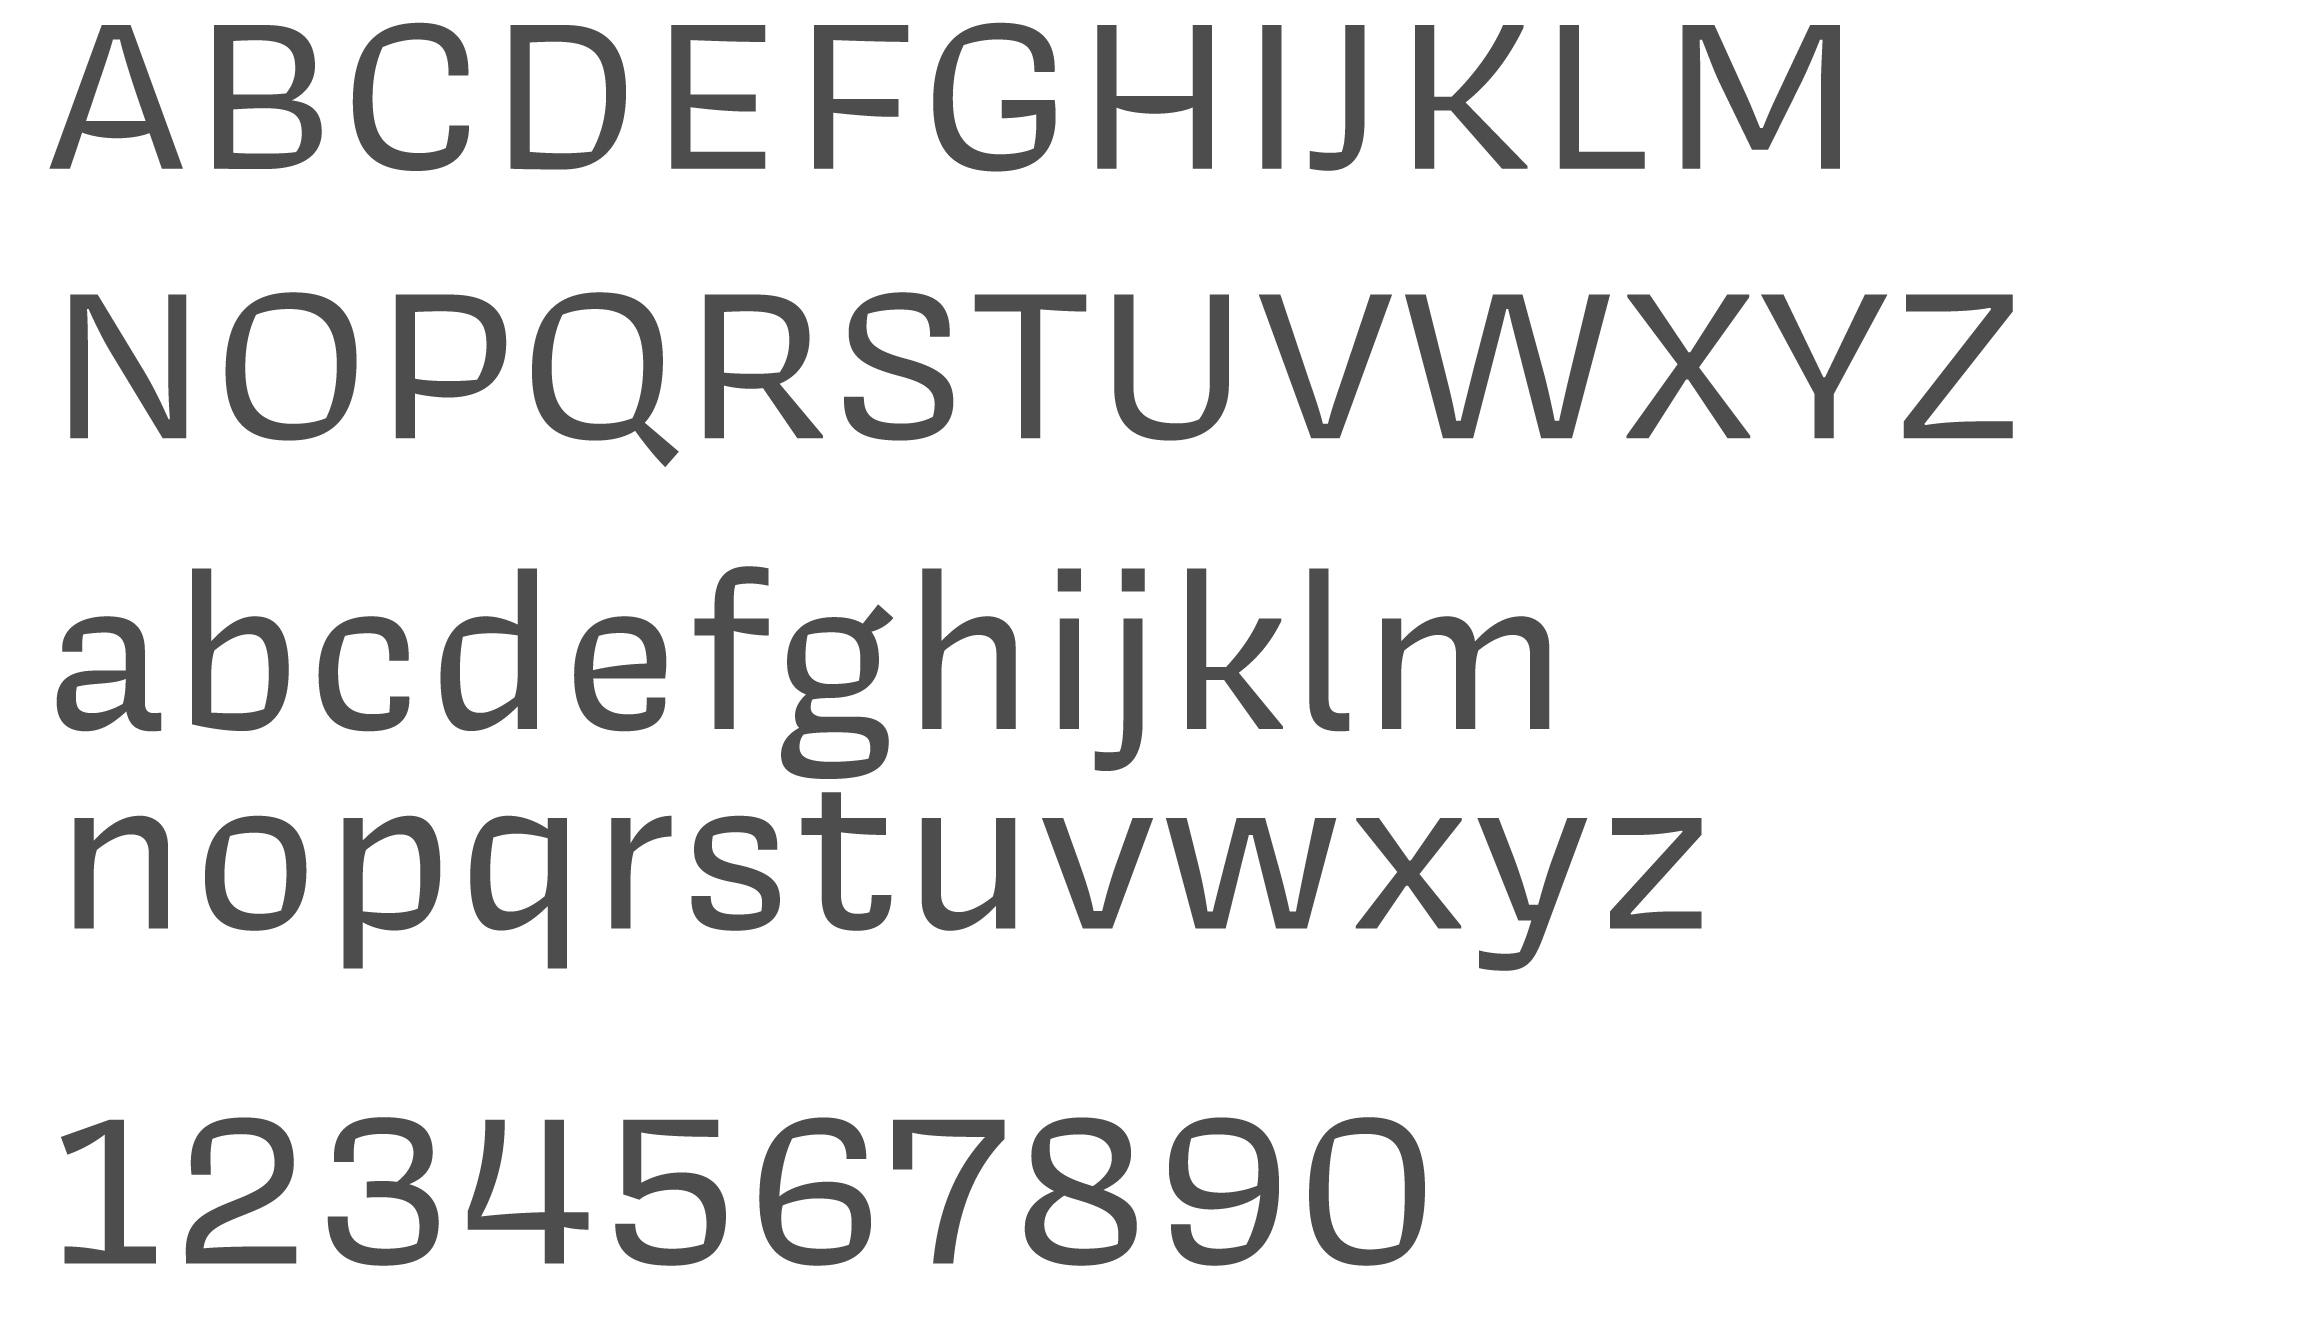 Covik Sans type face displayed and an upper and lower case alphabet and numbers